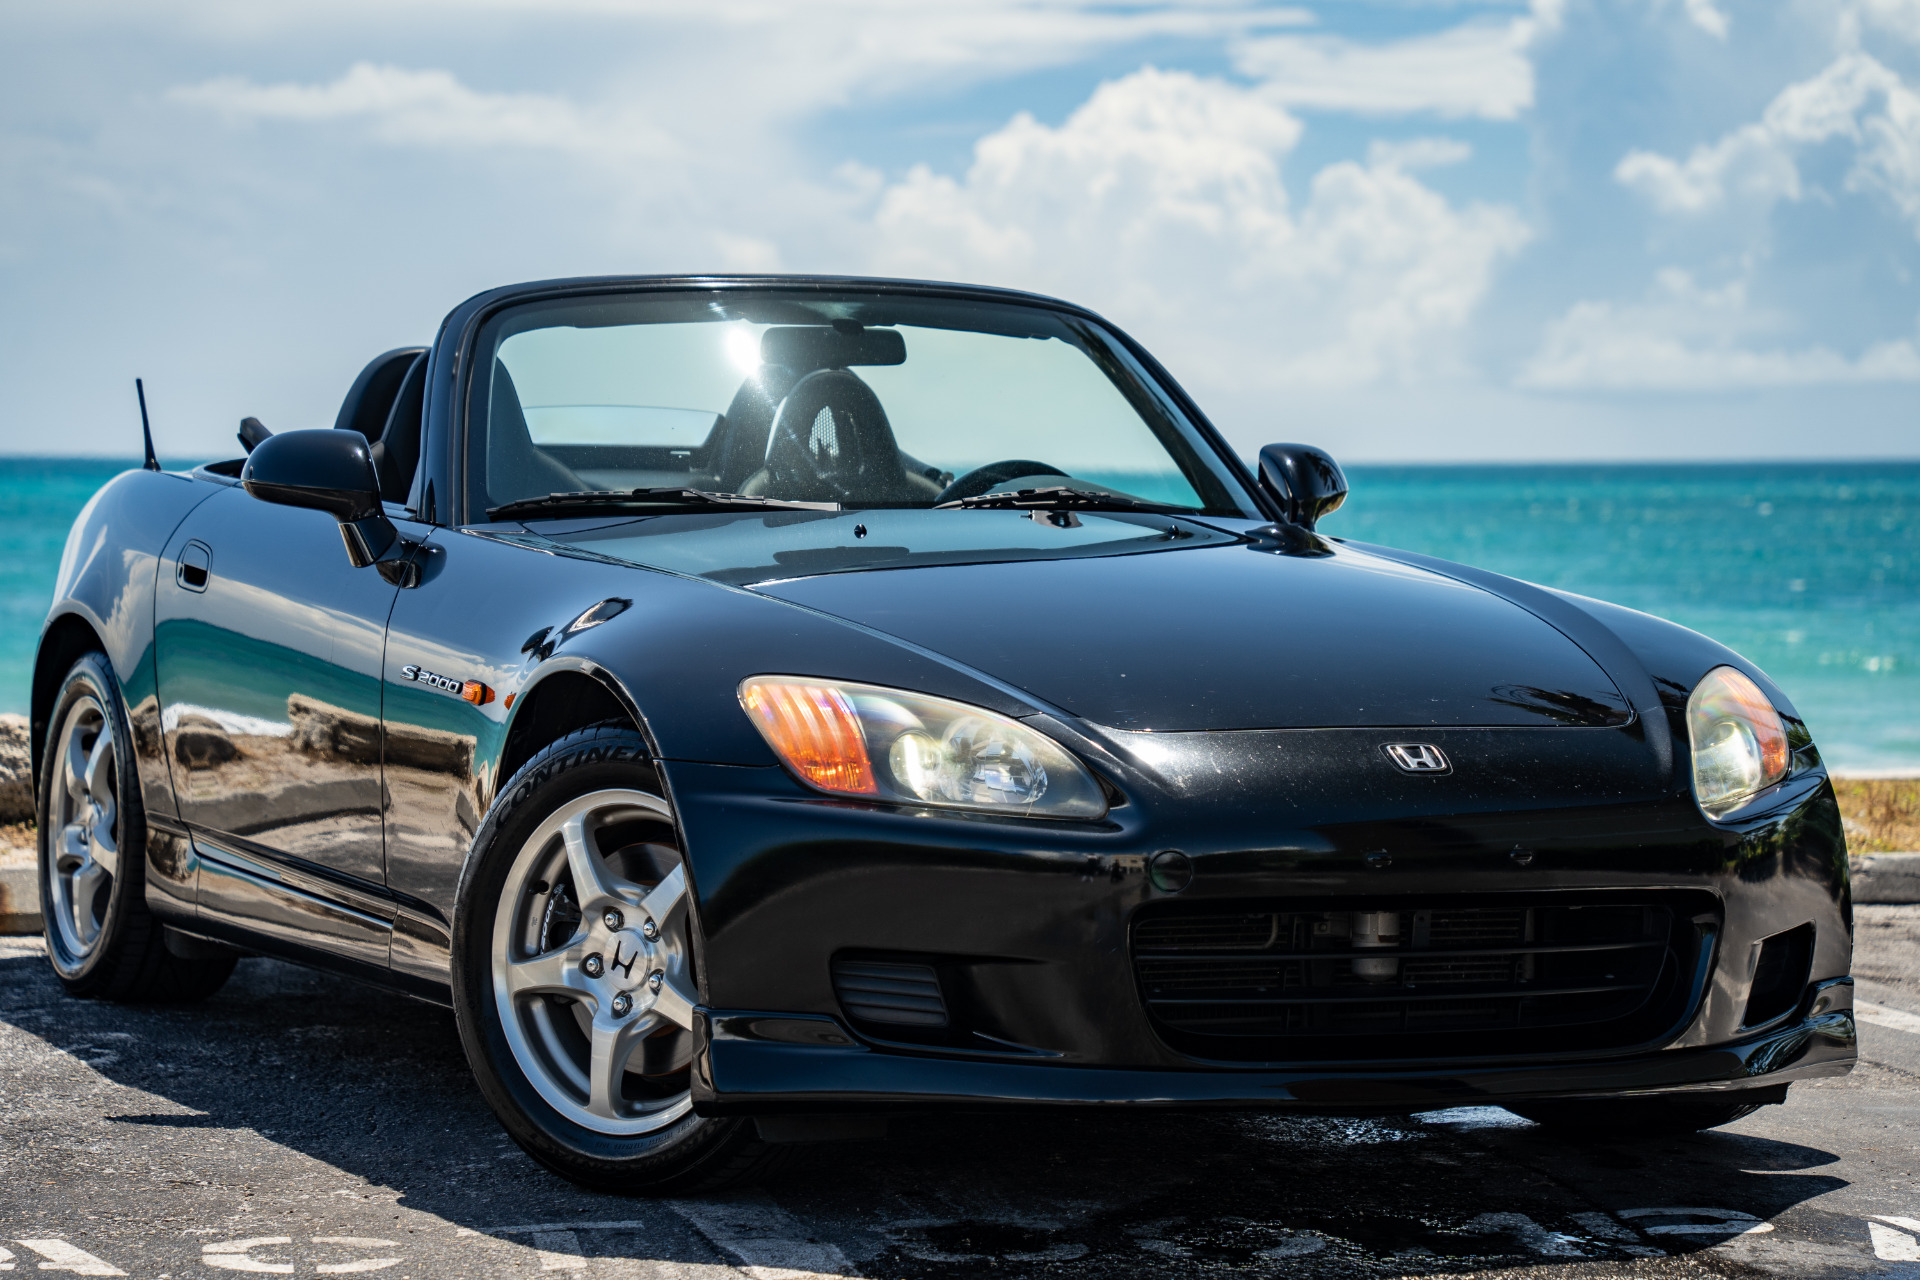 Pre-Owned 2002 Honda S2000 For Sale (Sold) | VB Autosports Stock 